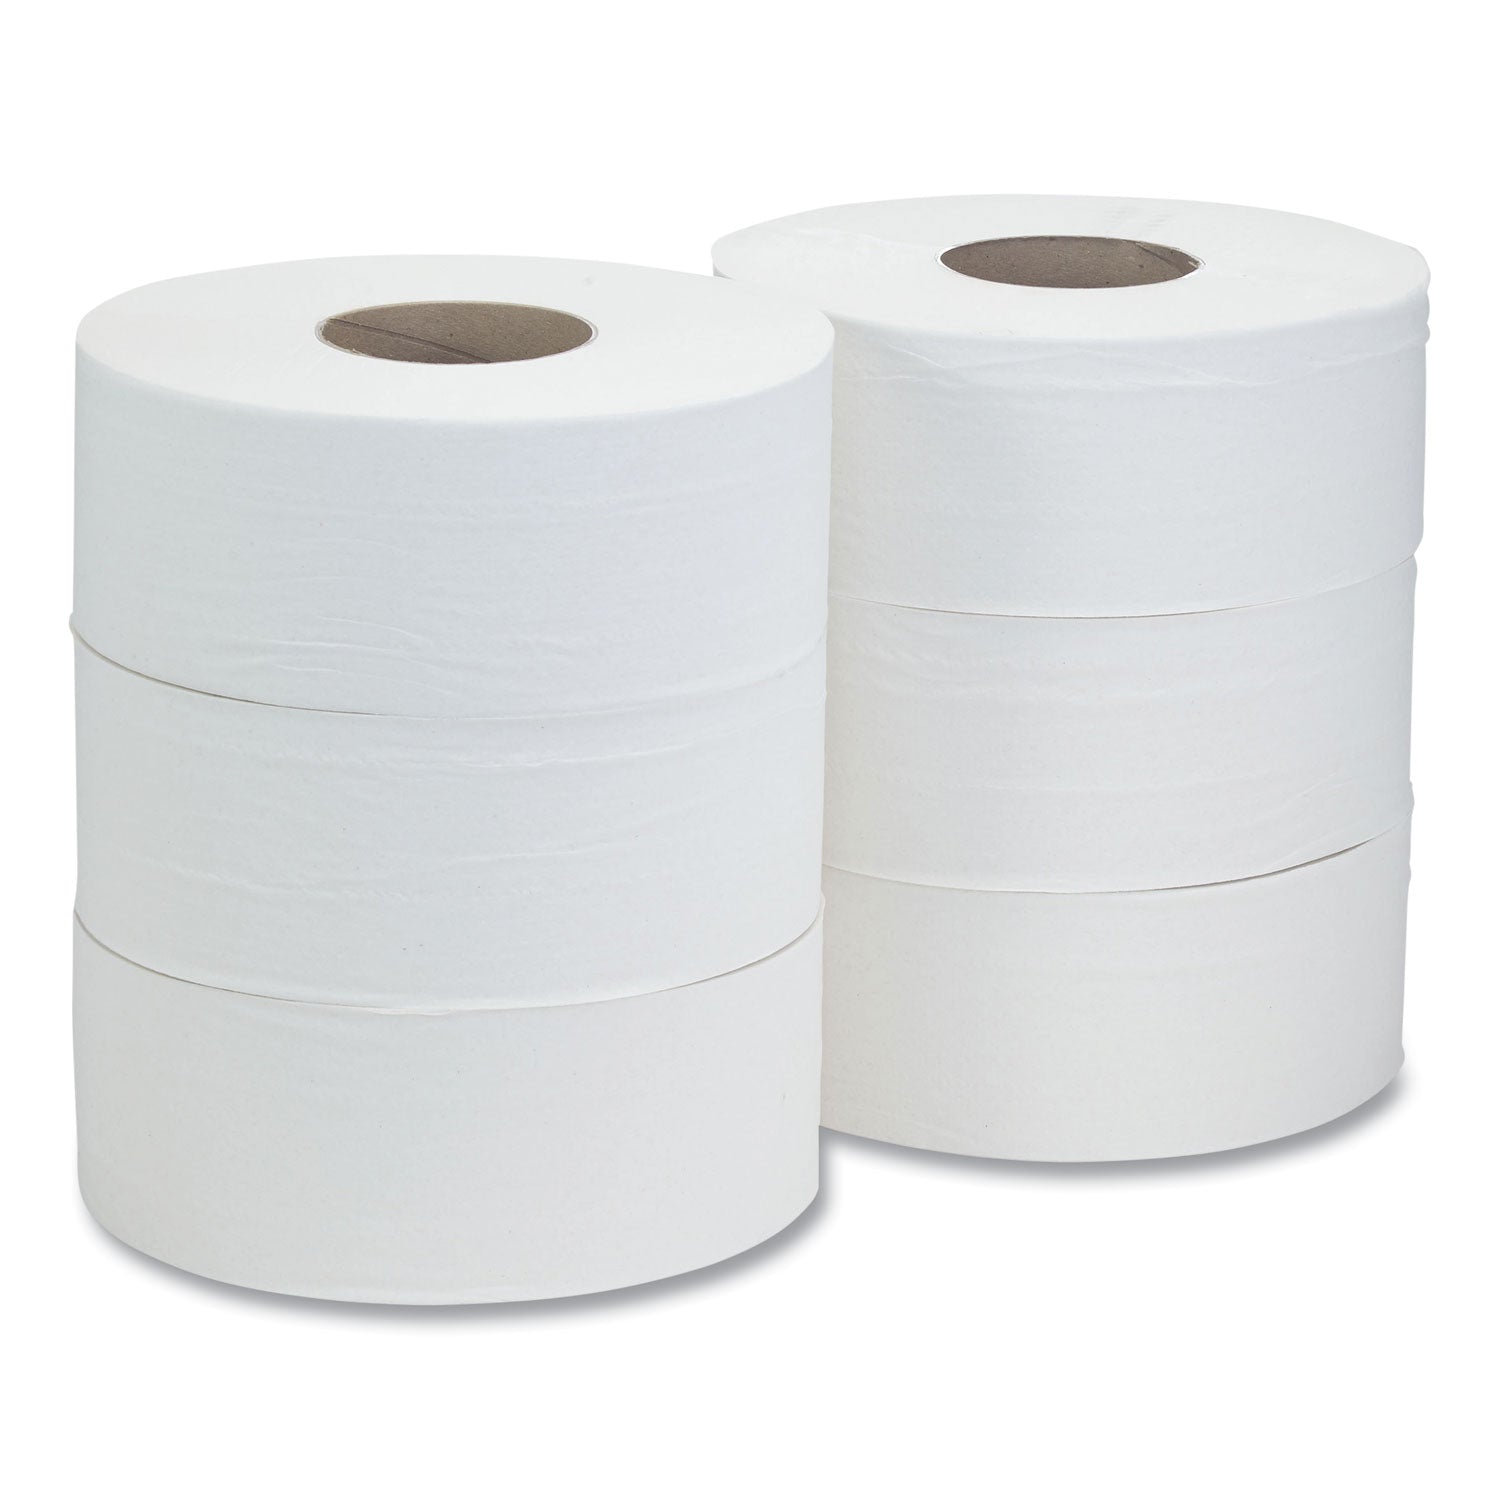 recycled-2-ply-jumbo-toilet-paper-septic-safe-white-355-x-1000-ft-6-rolls-carton_cwz887835 - 2